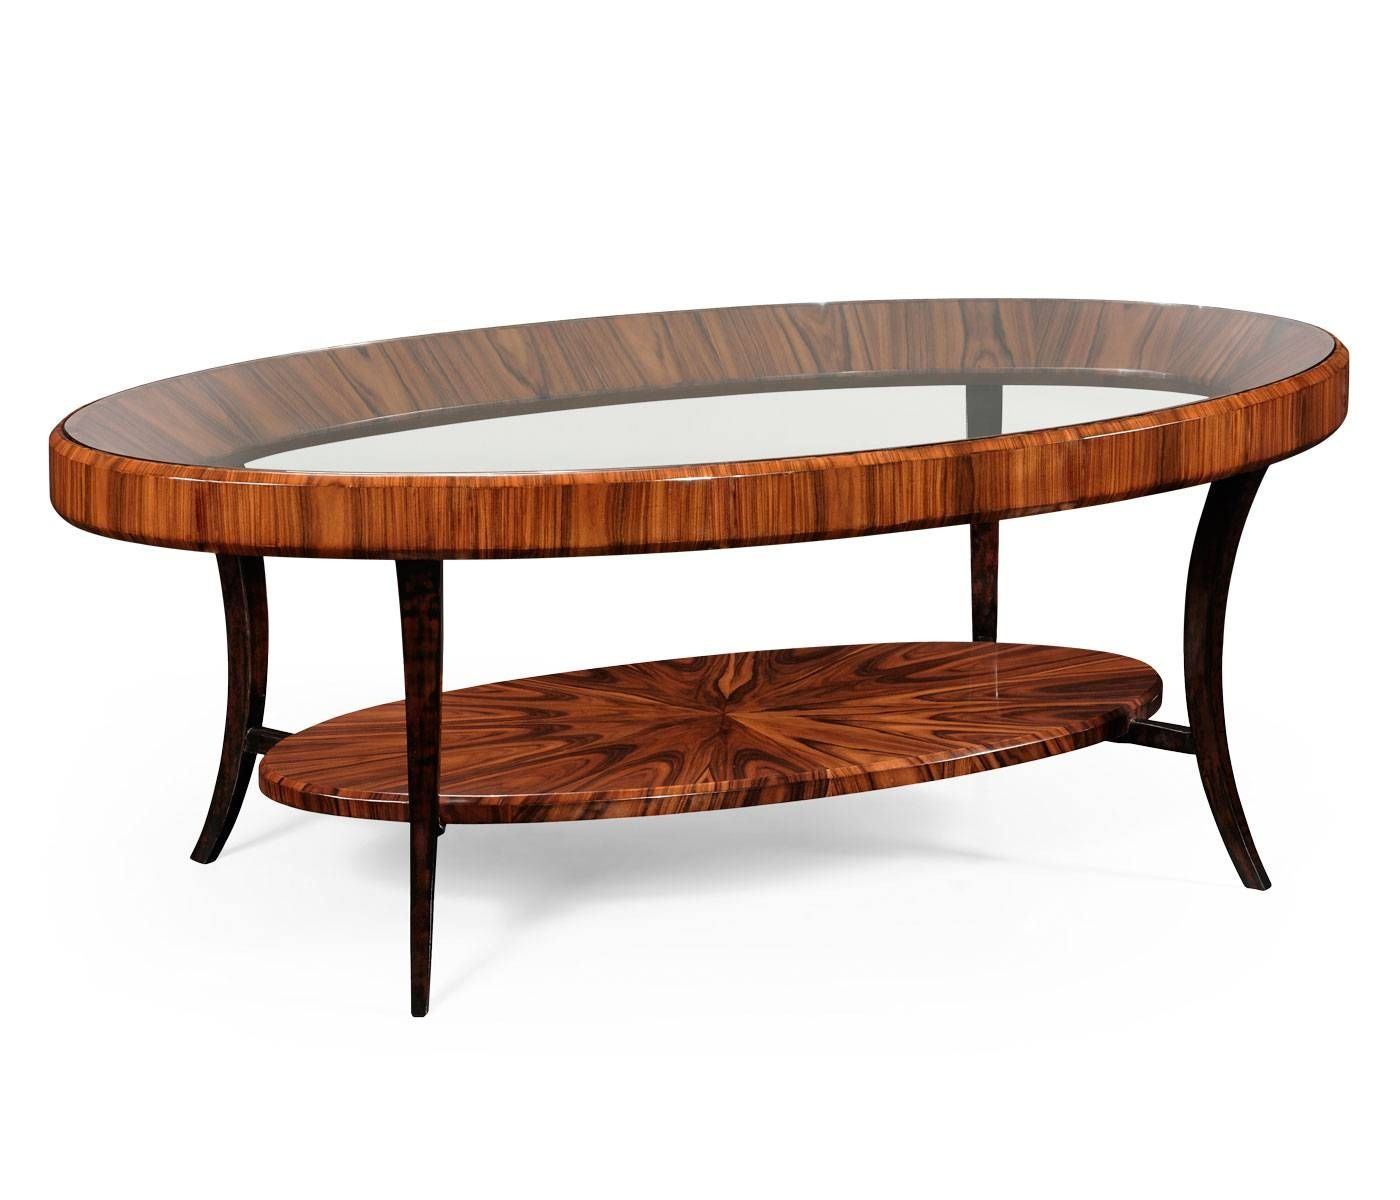 Furniture: Small Oval Coffee Table | Walmart Round Coffee Table Pertaining To Cheap Coffee Tables With Storage (View 12 of 30)